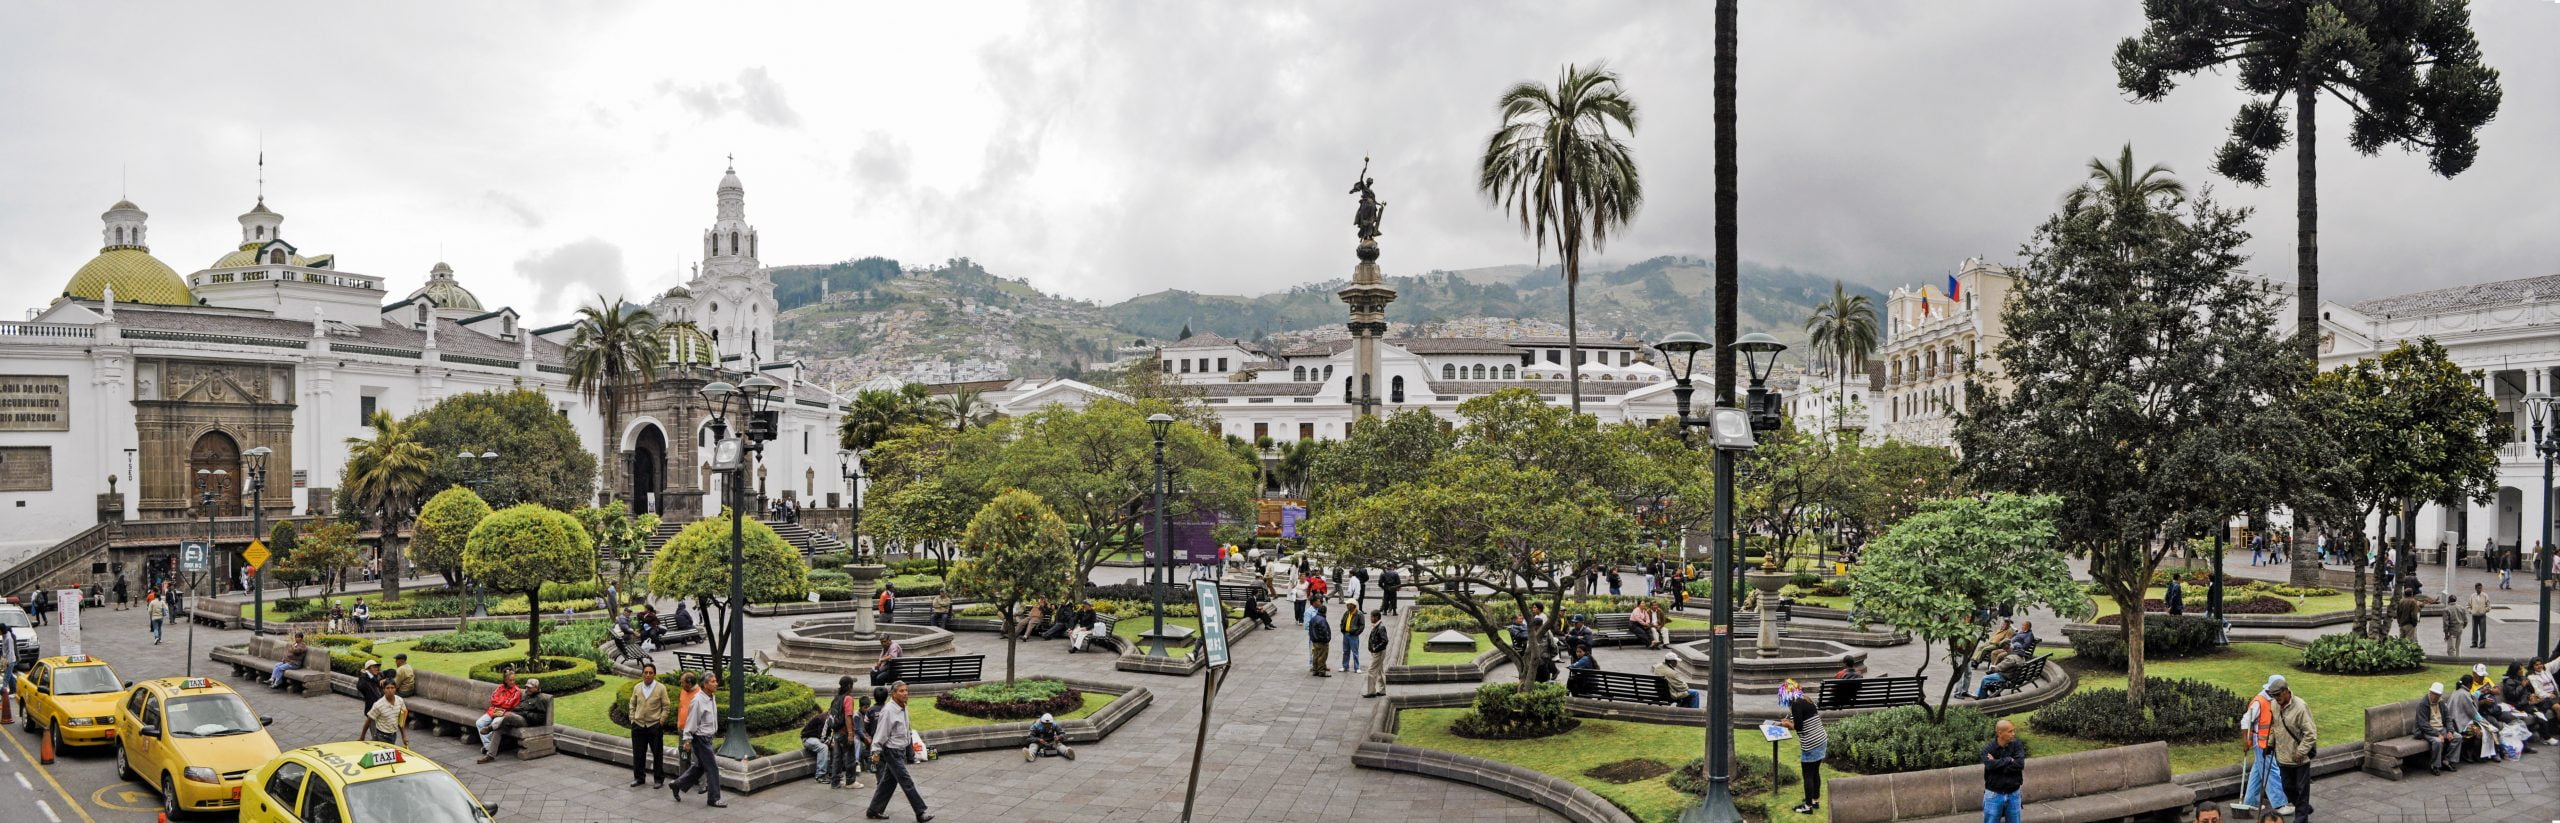 Quito_Independence-Square-scaled-1.jpg